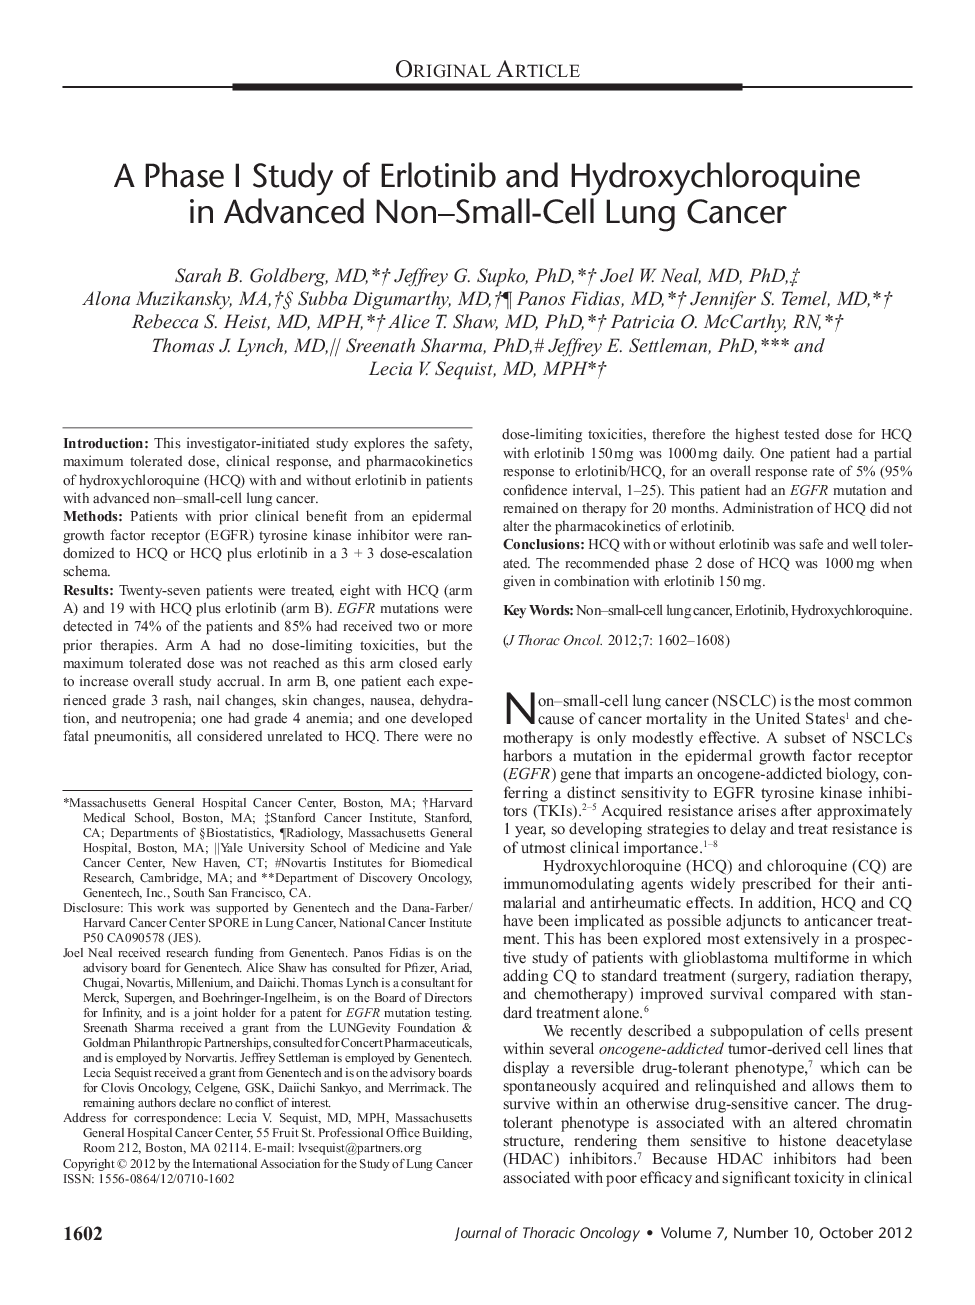 A Phase I Study of Erlotinib and Hydroxychloroquine in Advanced Non–Small-Cell Lung Cancer 